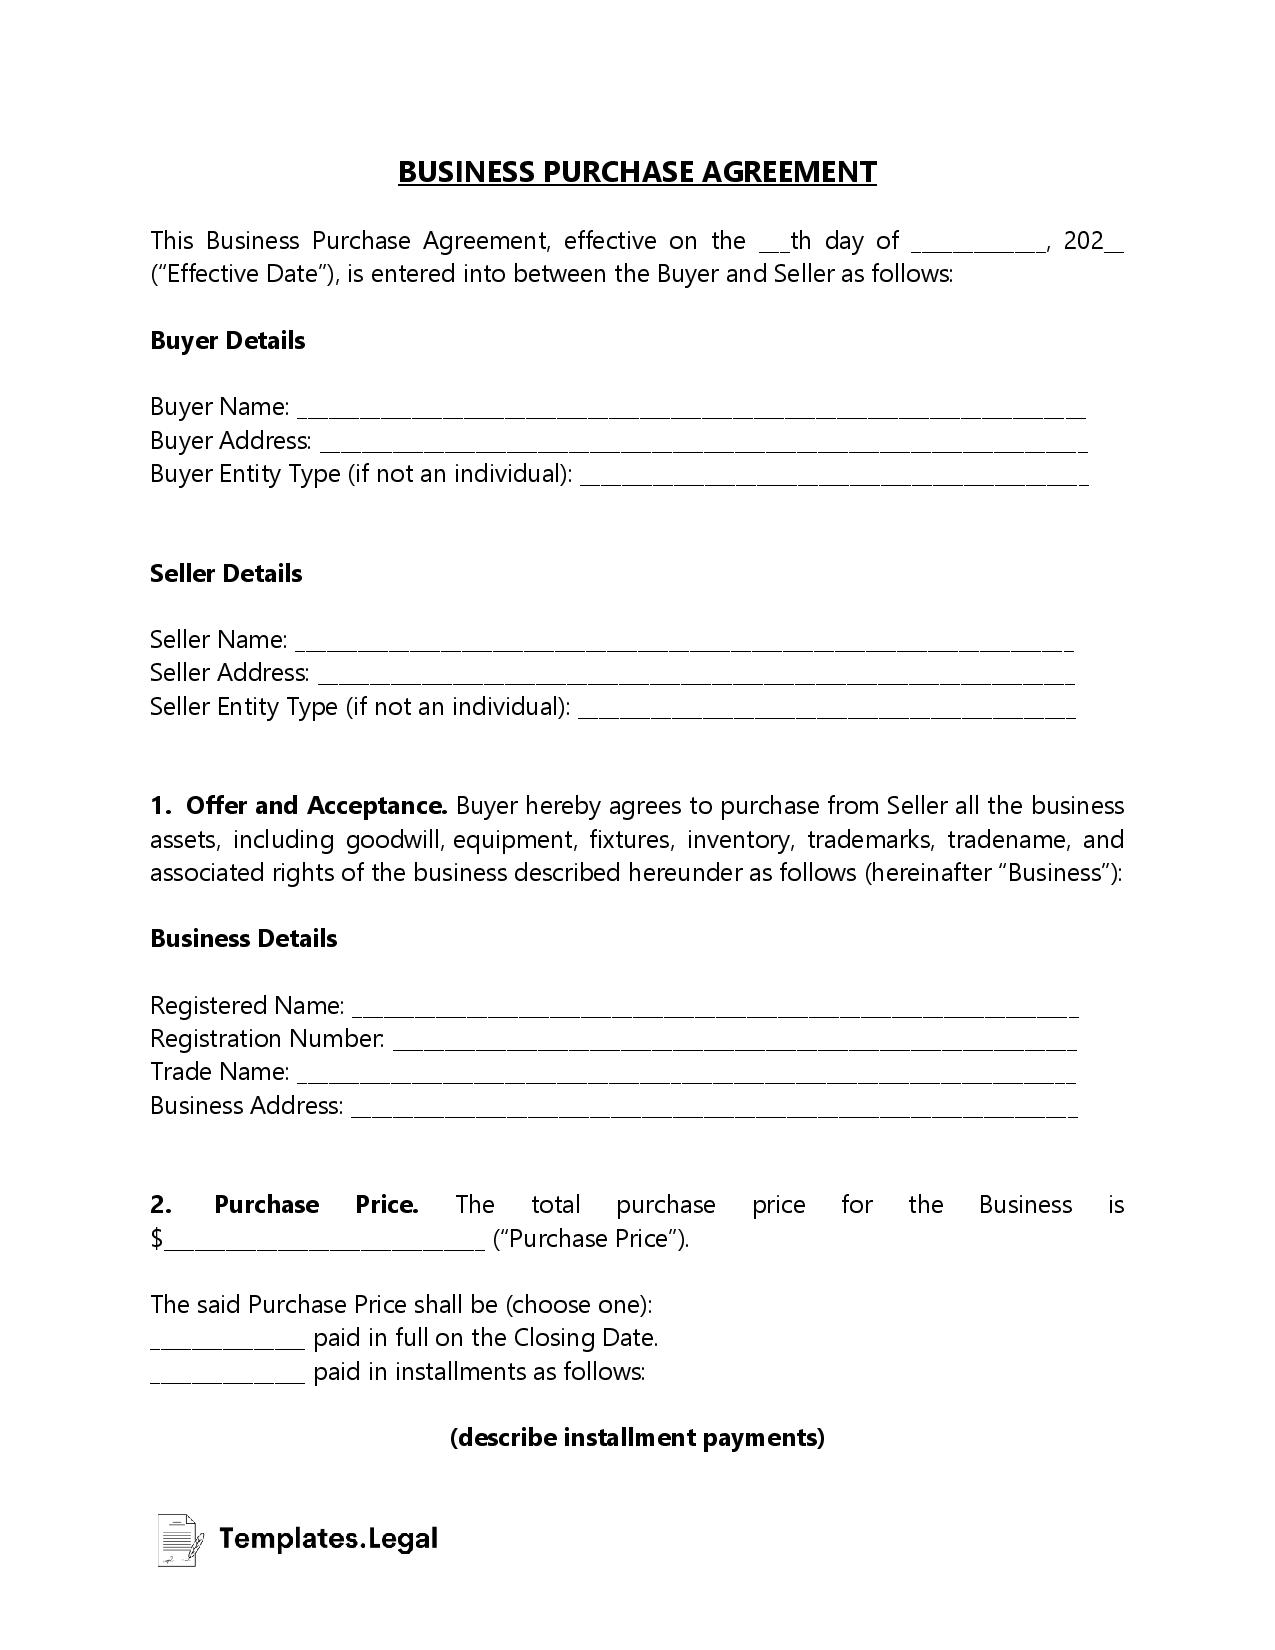 Business Purchase Agreement - Templates.Legal